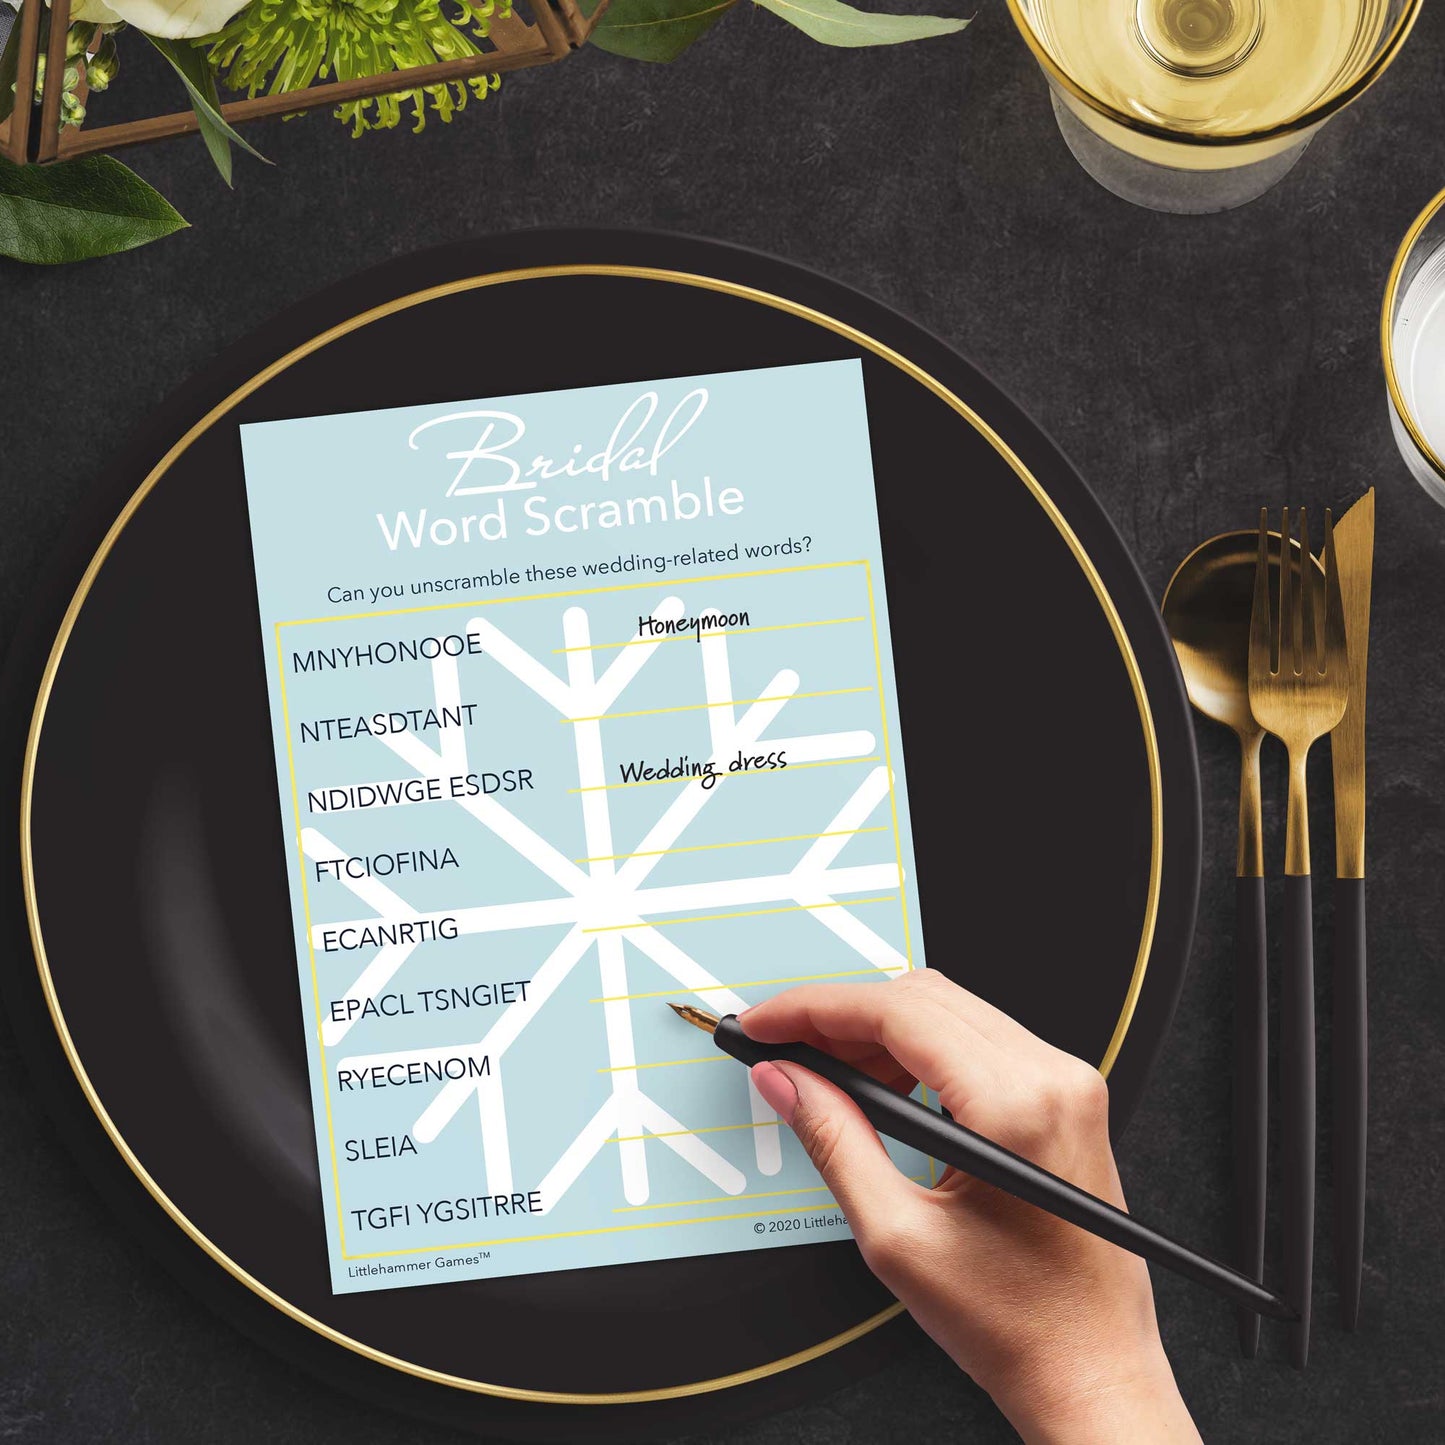 Woman with a pen playing a snowflake Bridal Word Scramble game card at a dark place setting